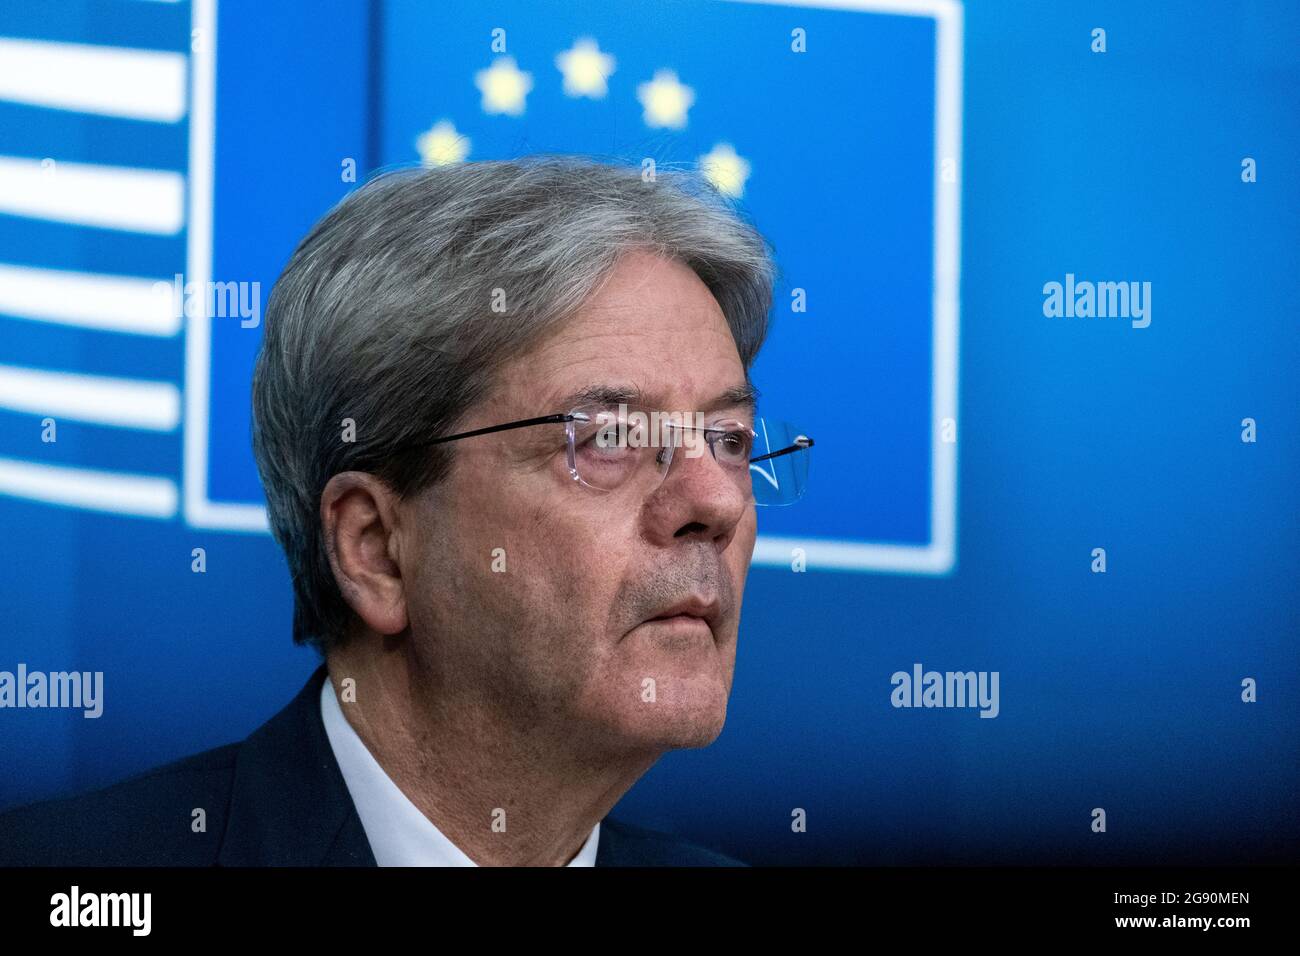 Paolo Gentiloni, Commissioner Economy, at the Informal videoconference of foreign and interior ministers at the European Council on the external aspects of the EU's migration policy, in the framework of the new Pact on Migration and Asylum. Brussels, Belgium. Stock Photo